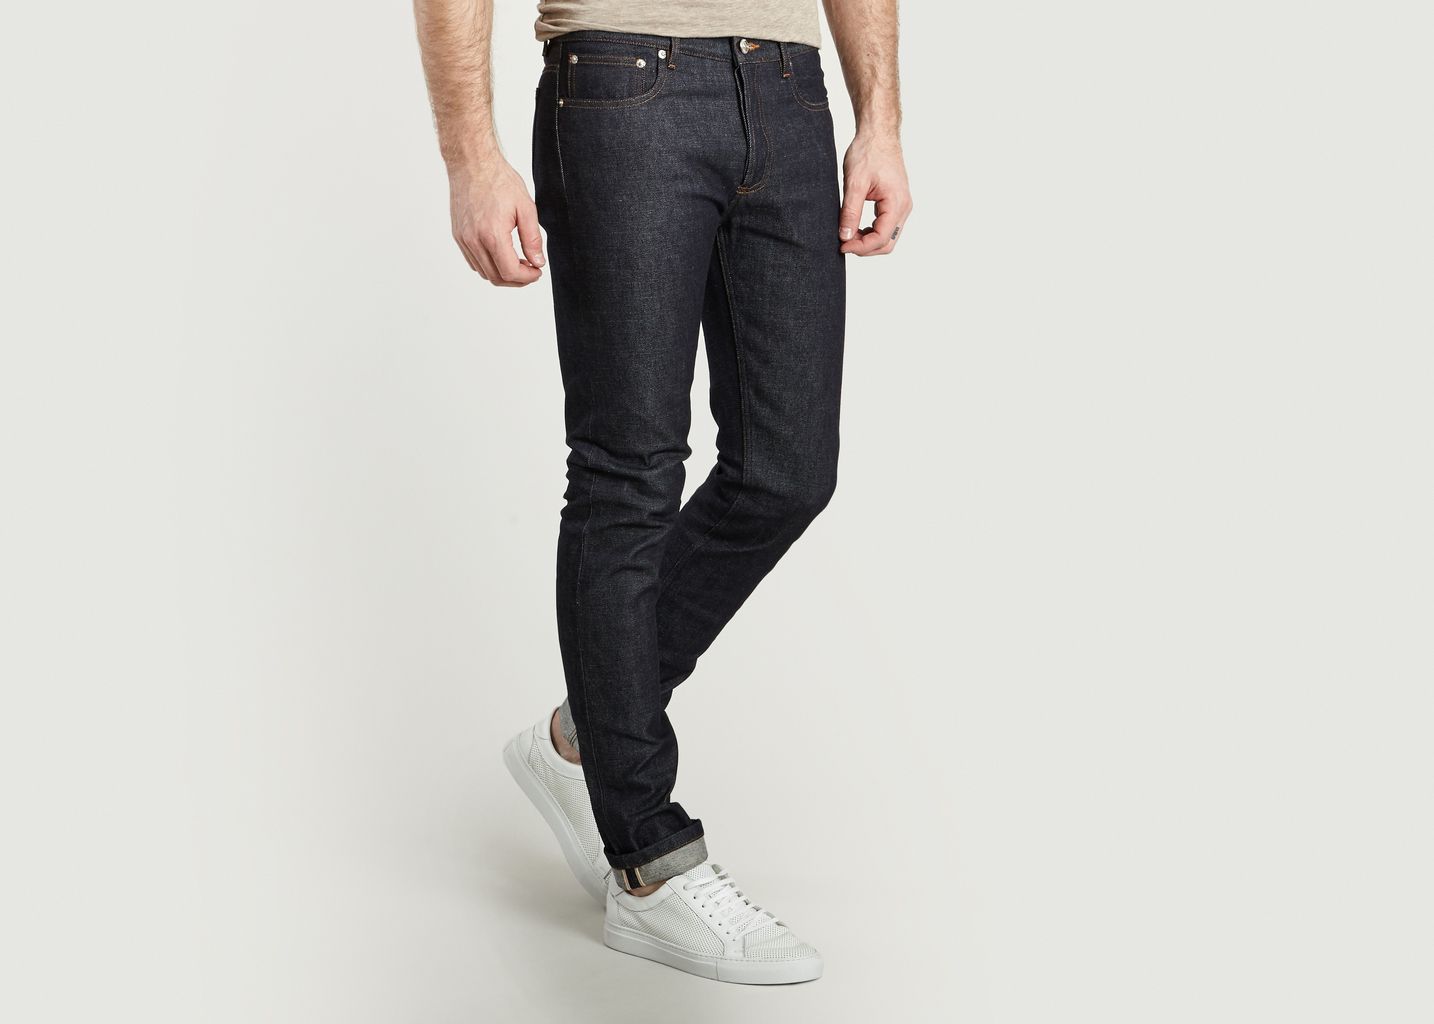 Small New Standard Jeans - A.P.C.